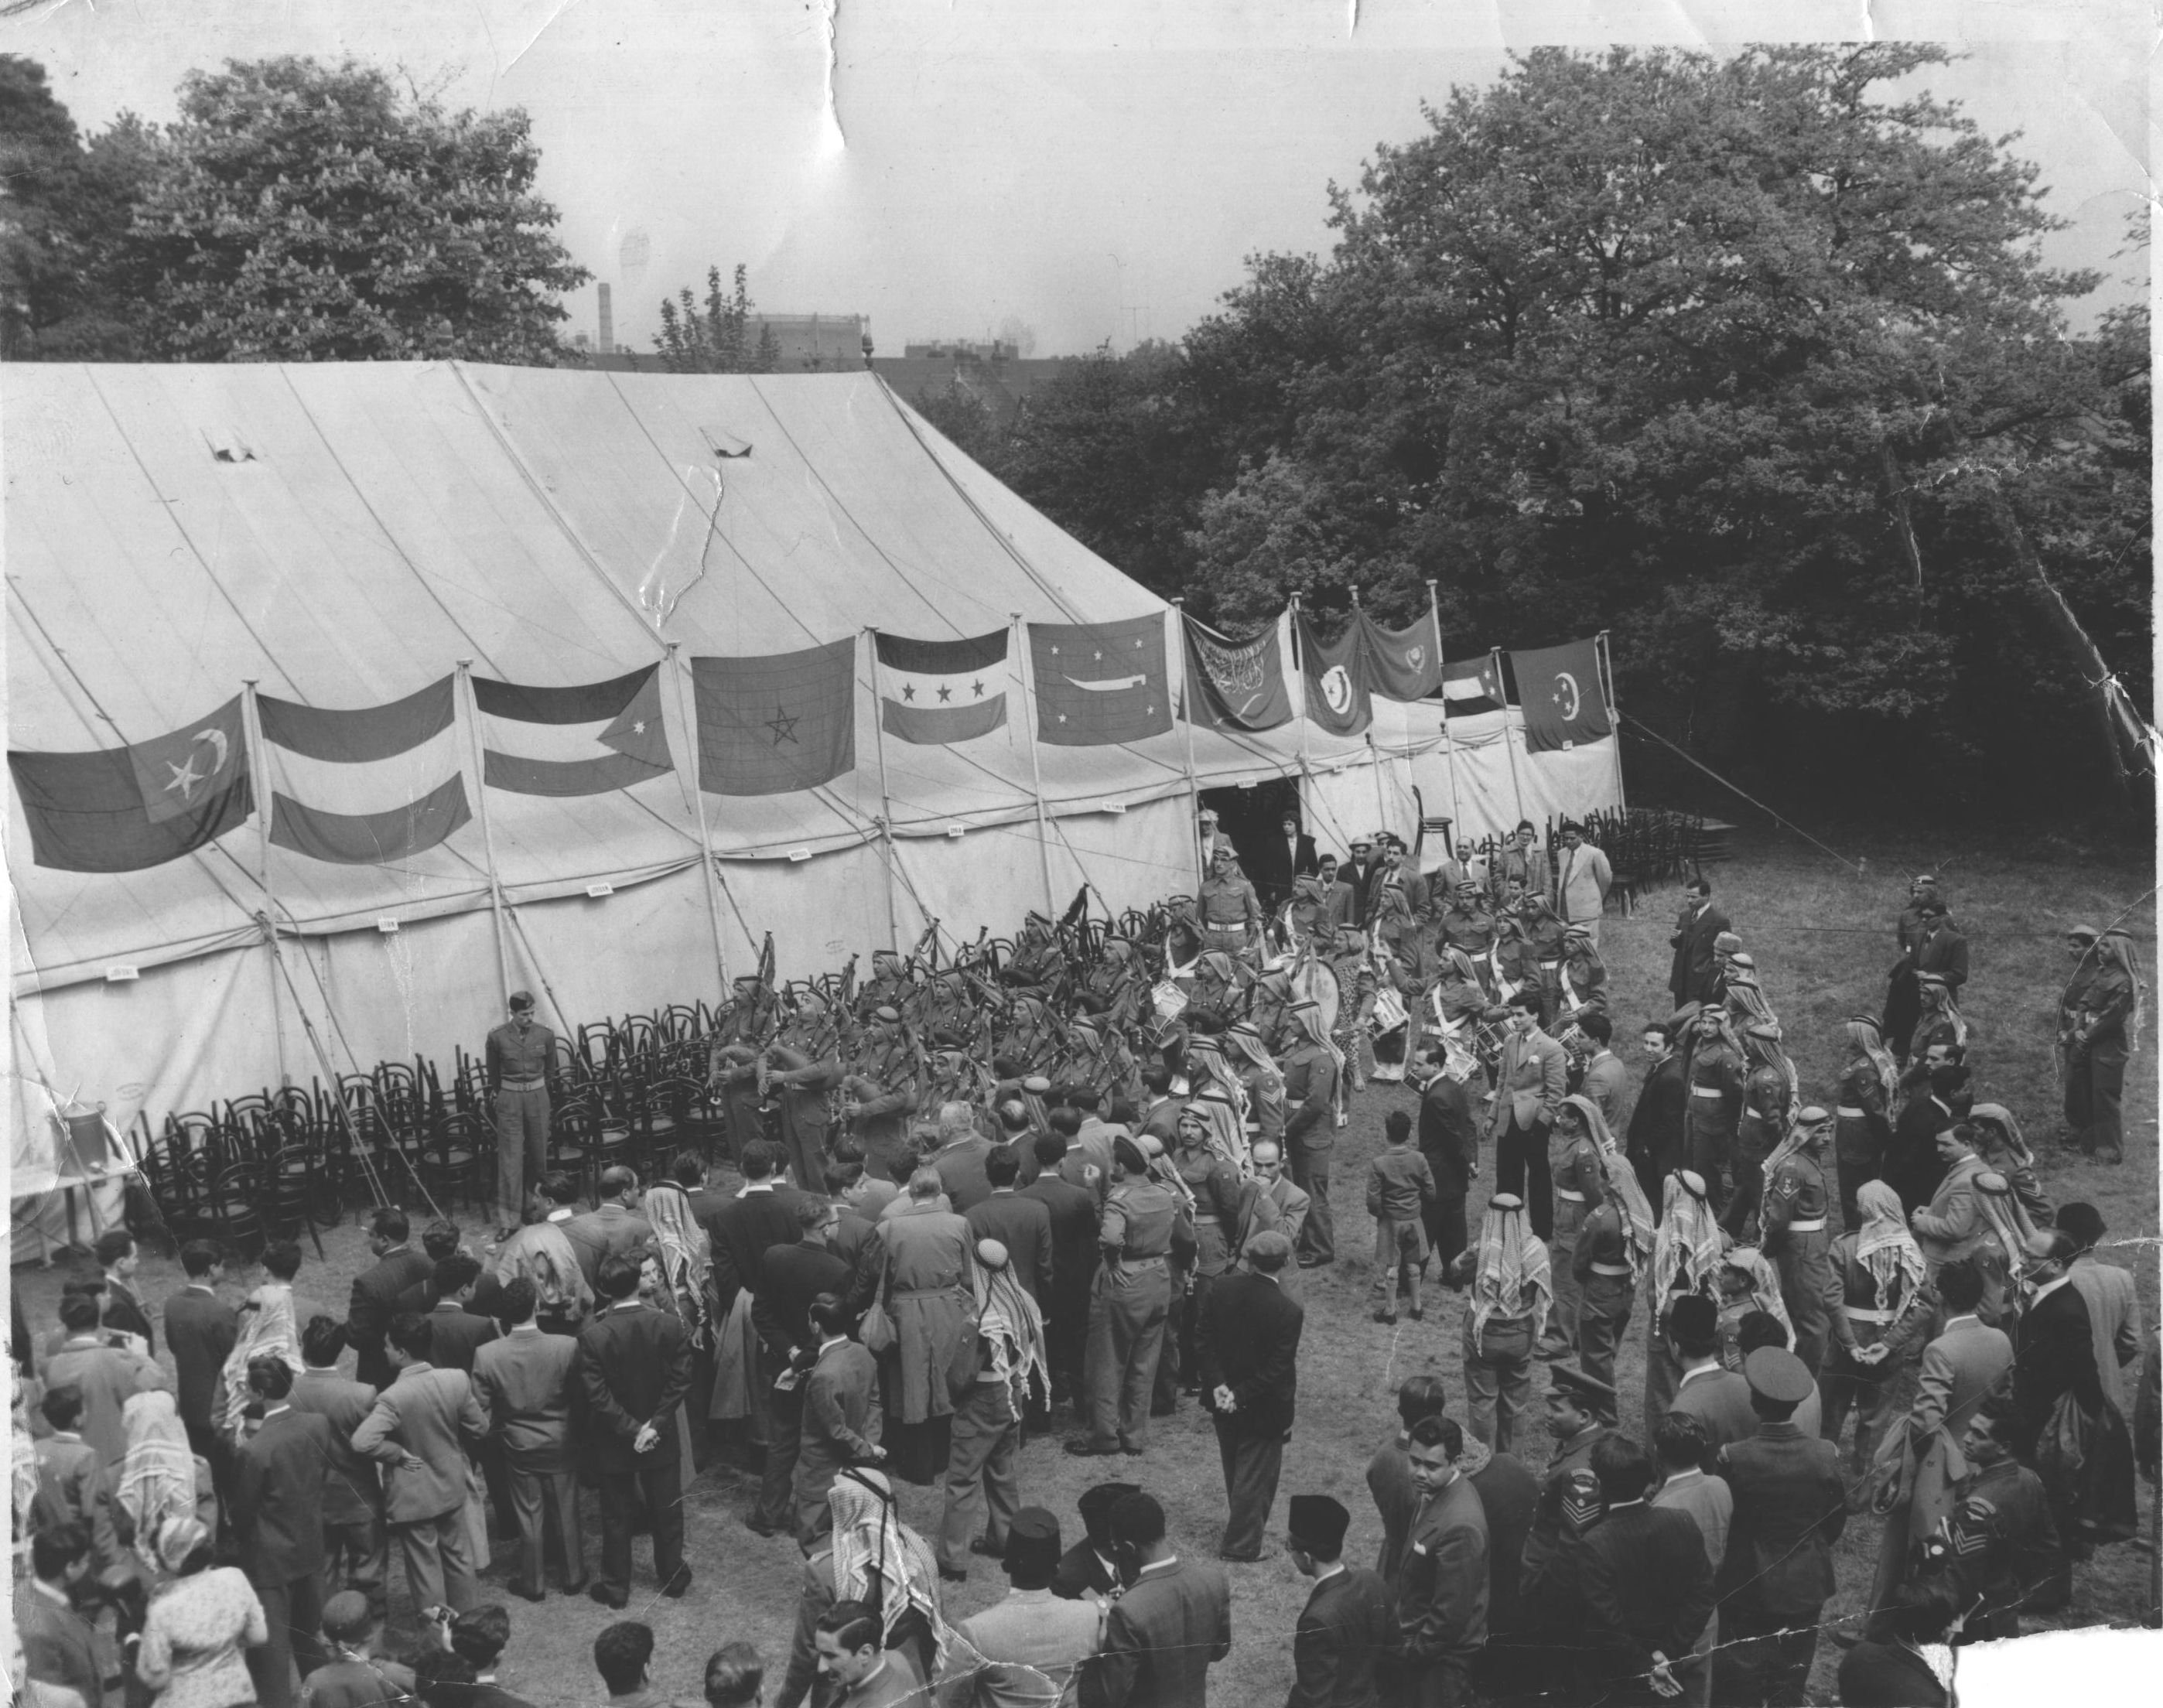 A view of probably an Eid gathering from the late 1940s